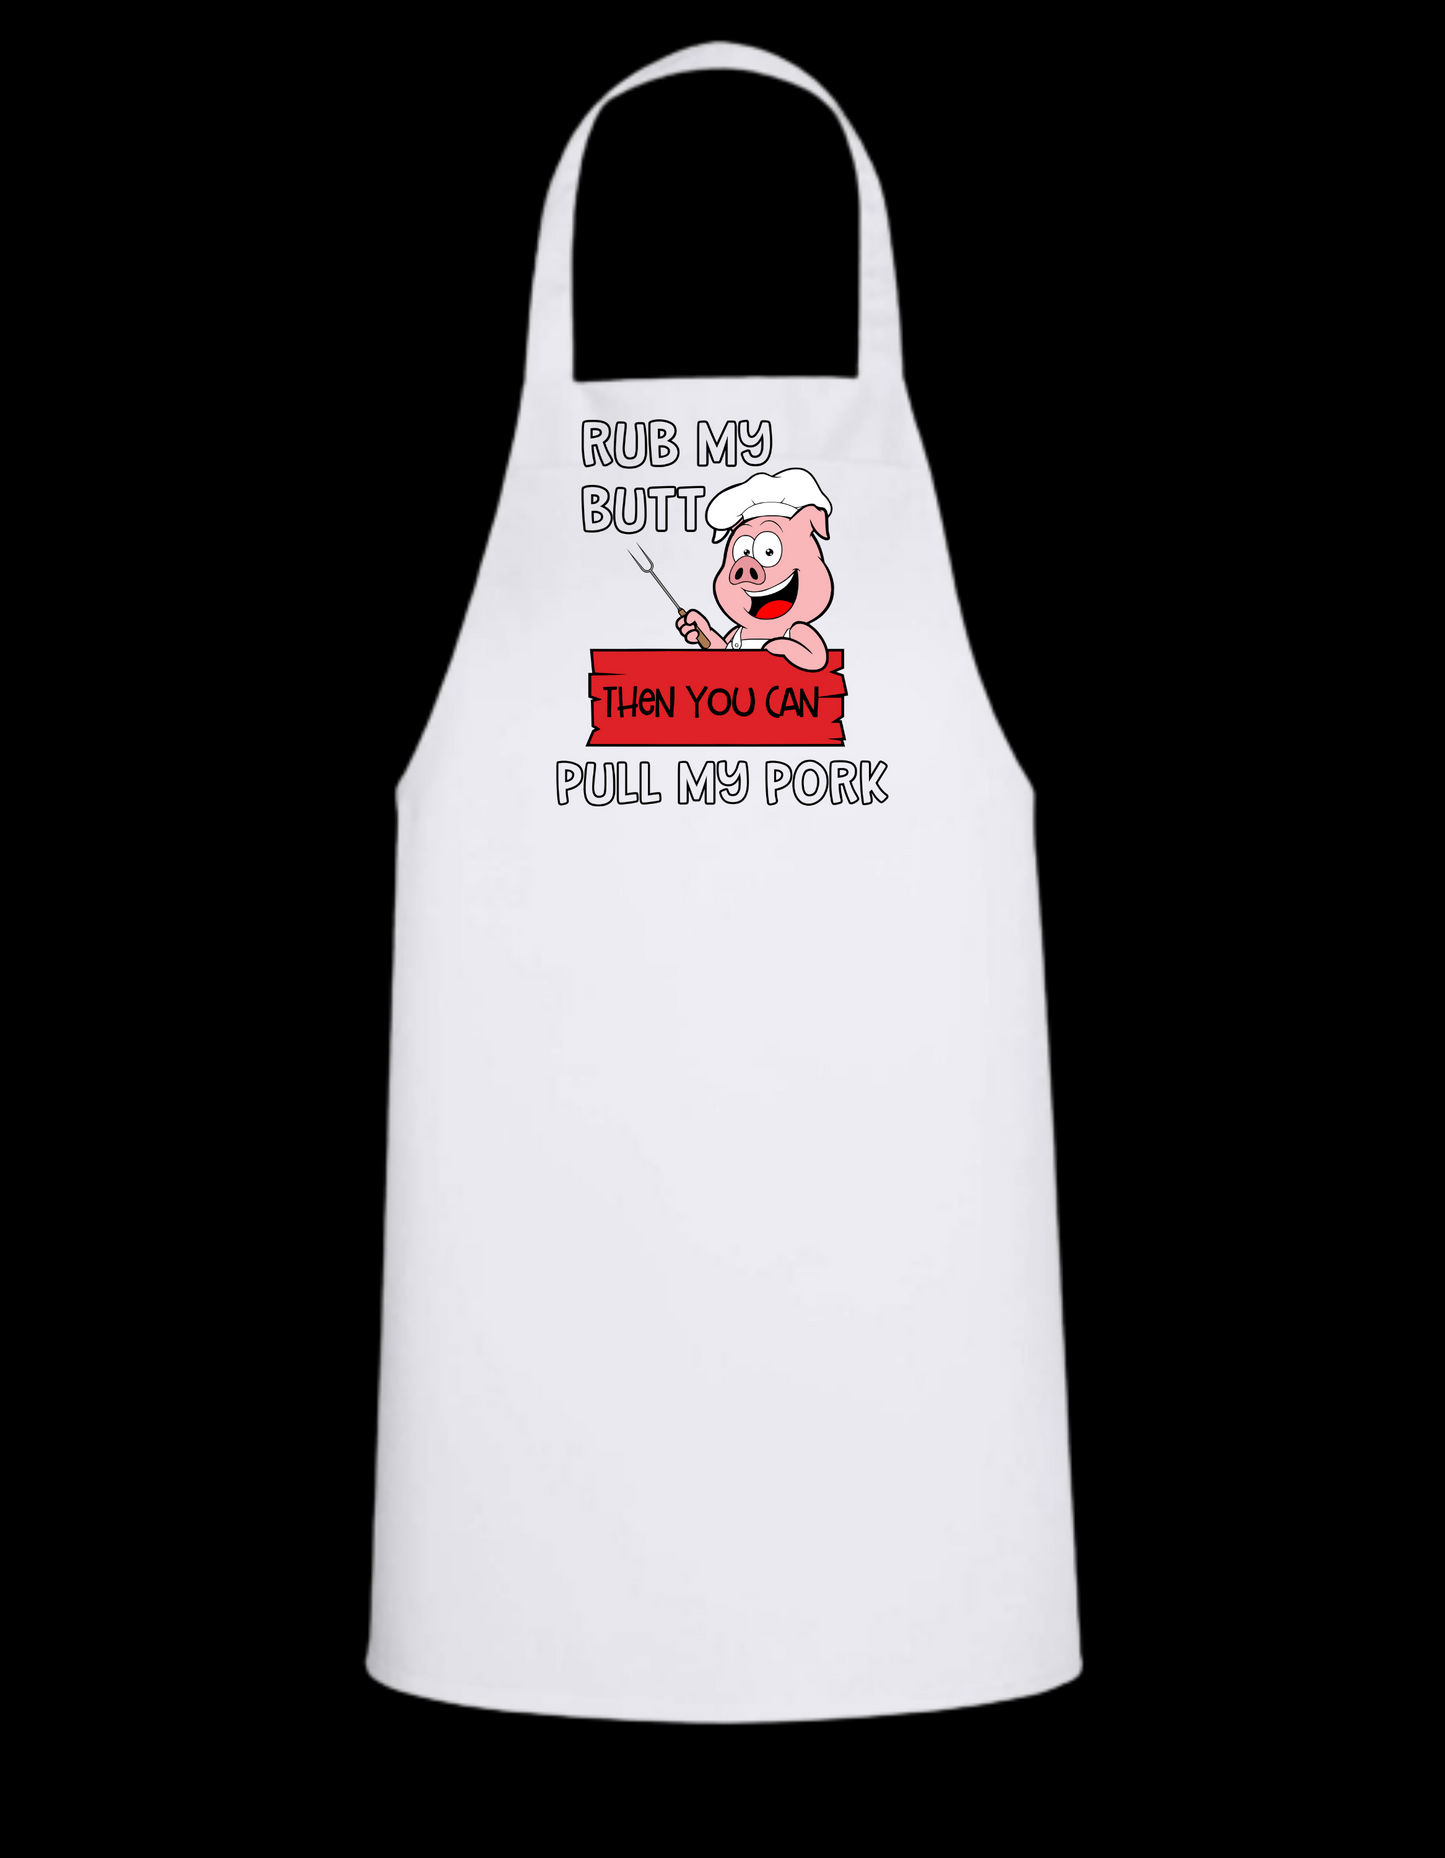 Rub My Butt Then You Can Pull My Pork - White Apron with Color design - Mister Snarky's